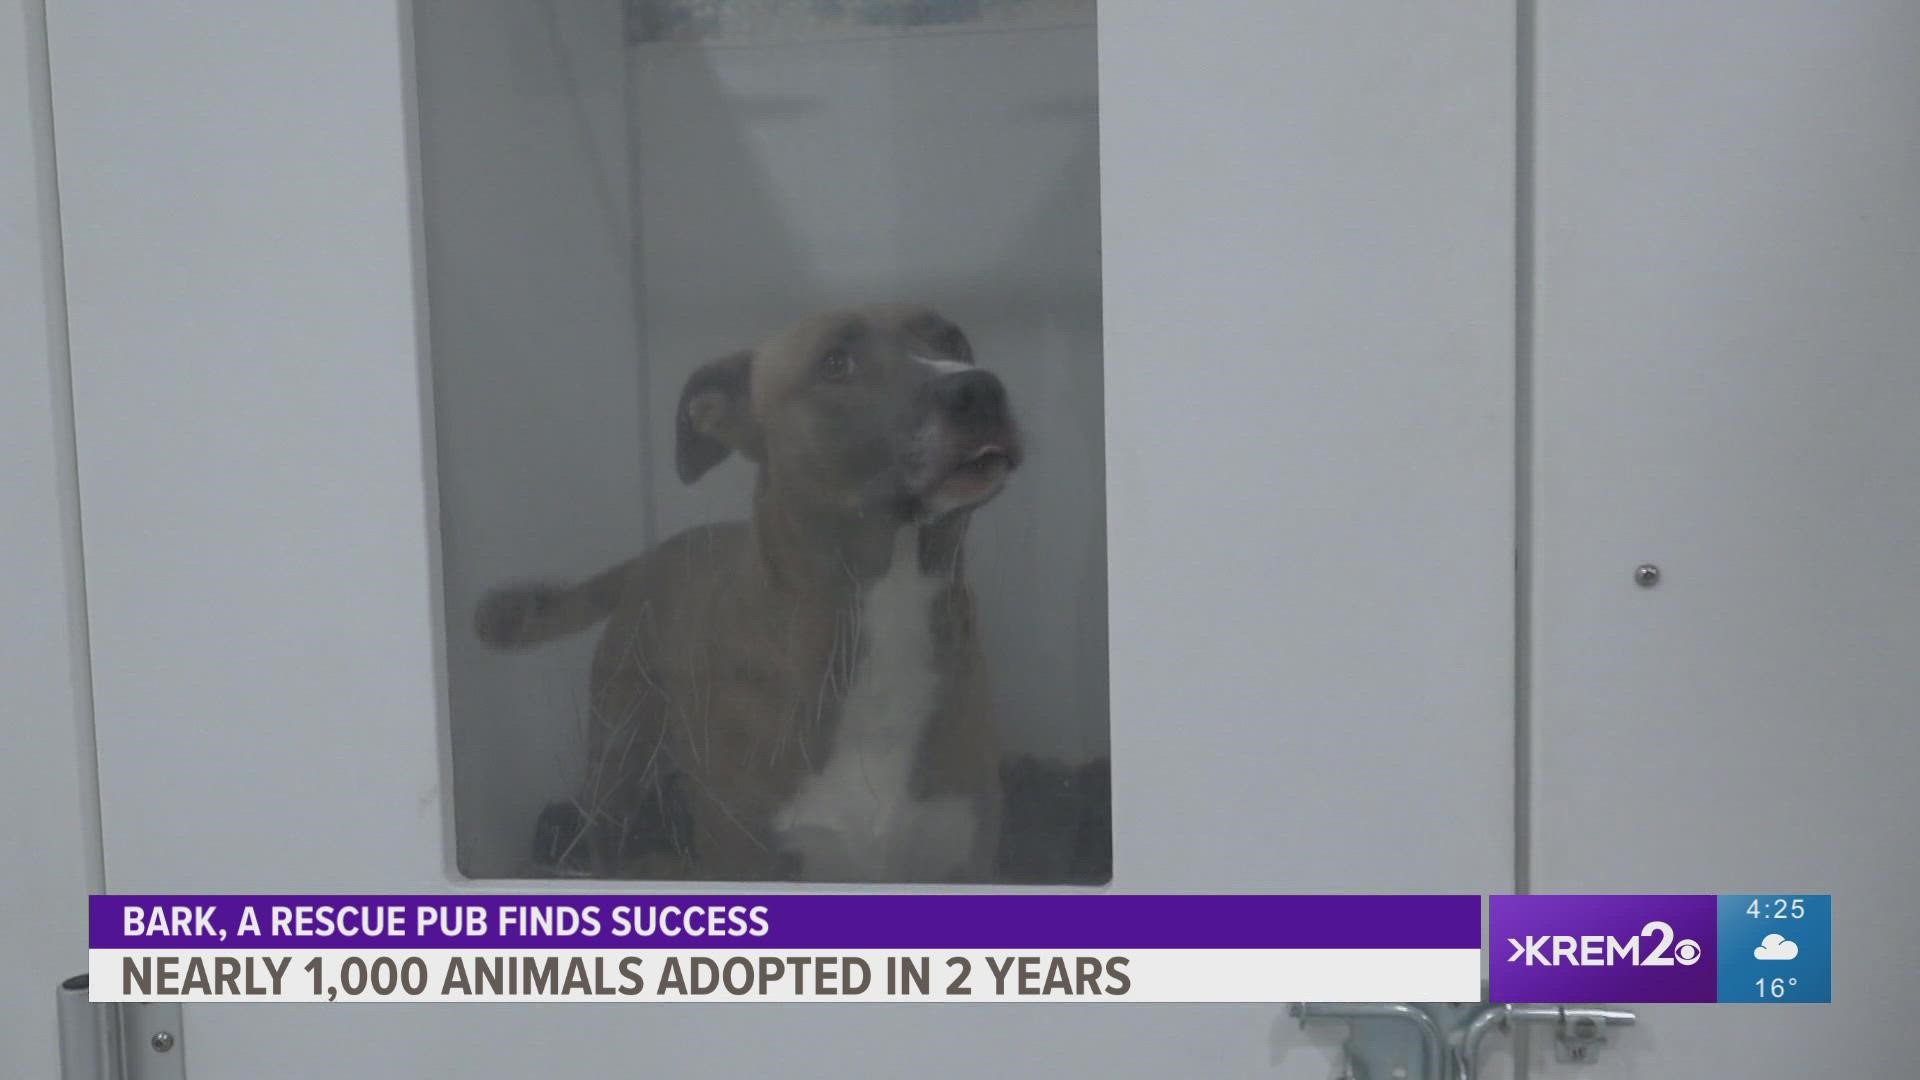 While other businesses struggled through the pandemic, Co-owner Josh Wade said Bark managed to adopt out nearly 1,000 animals in two years.